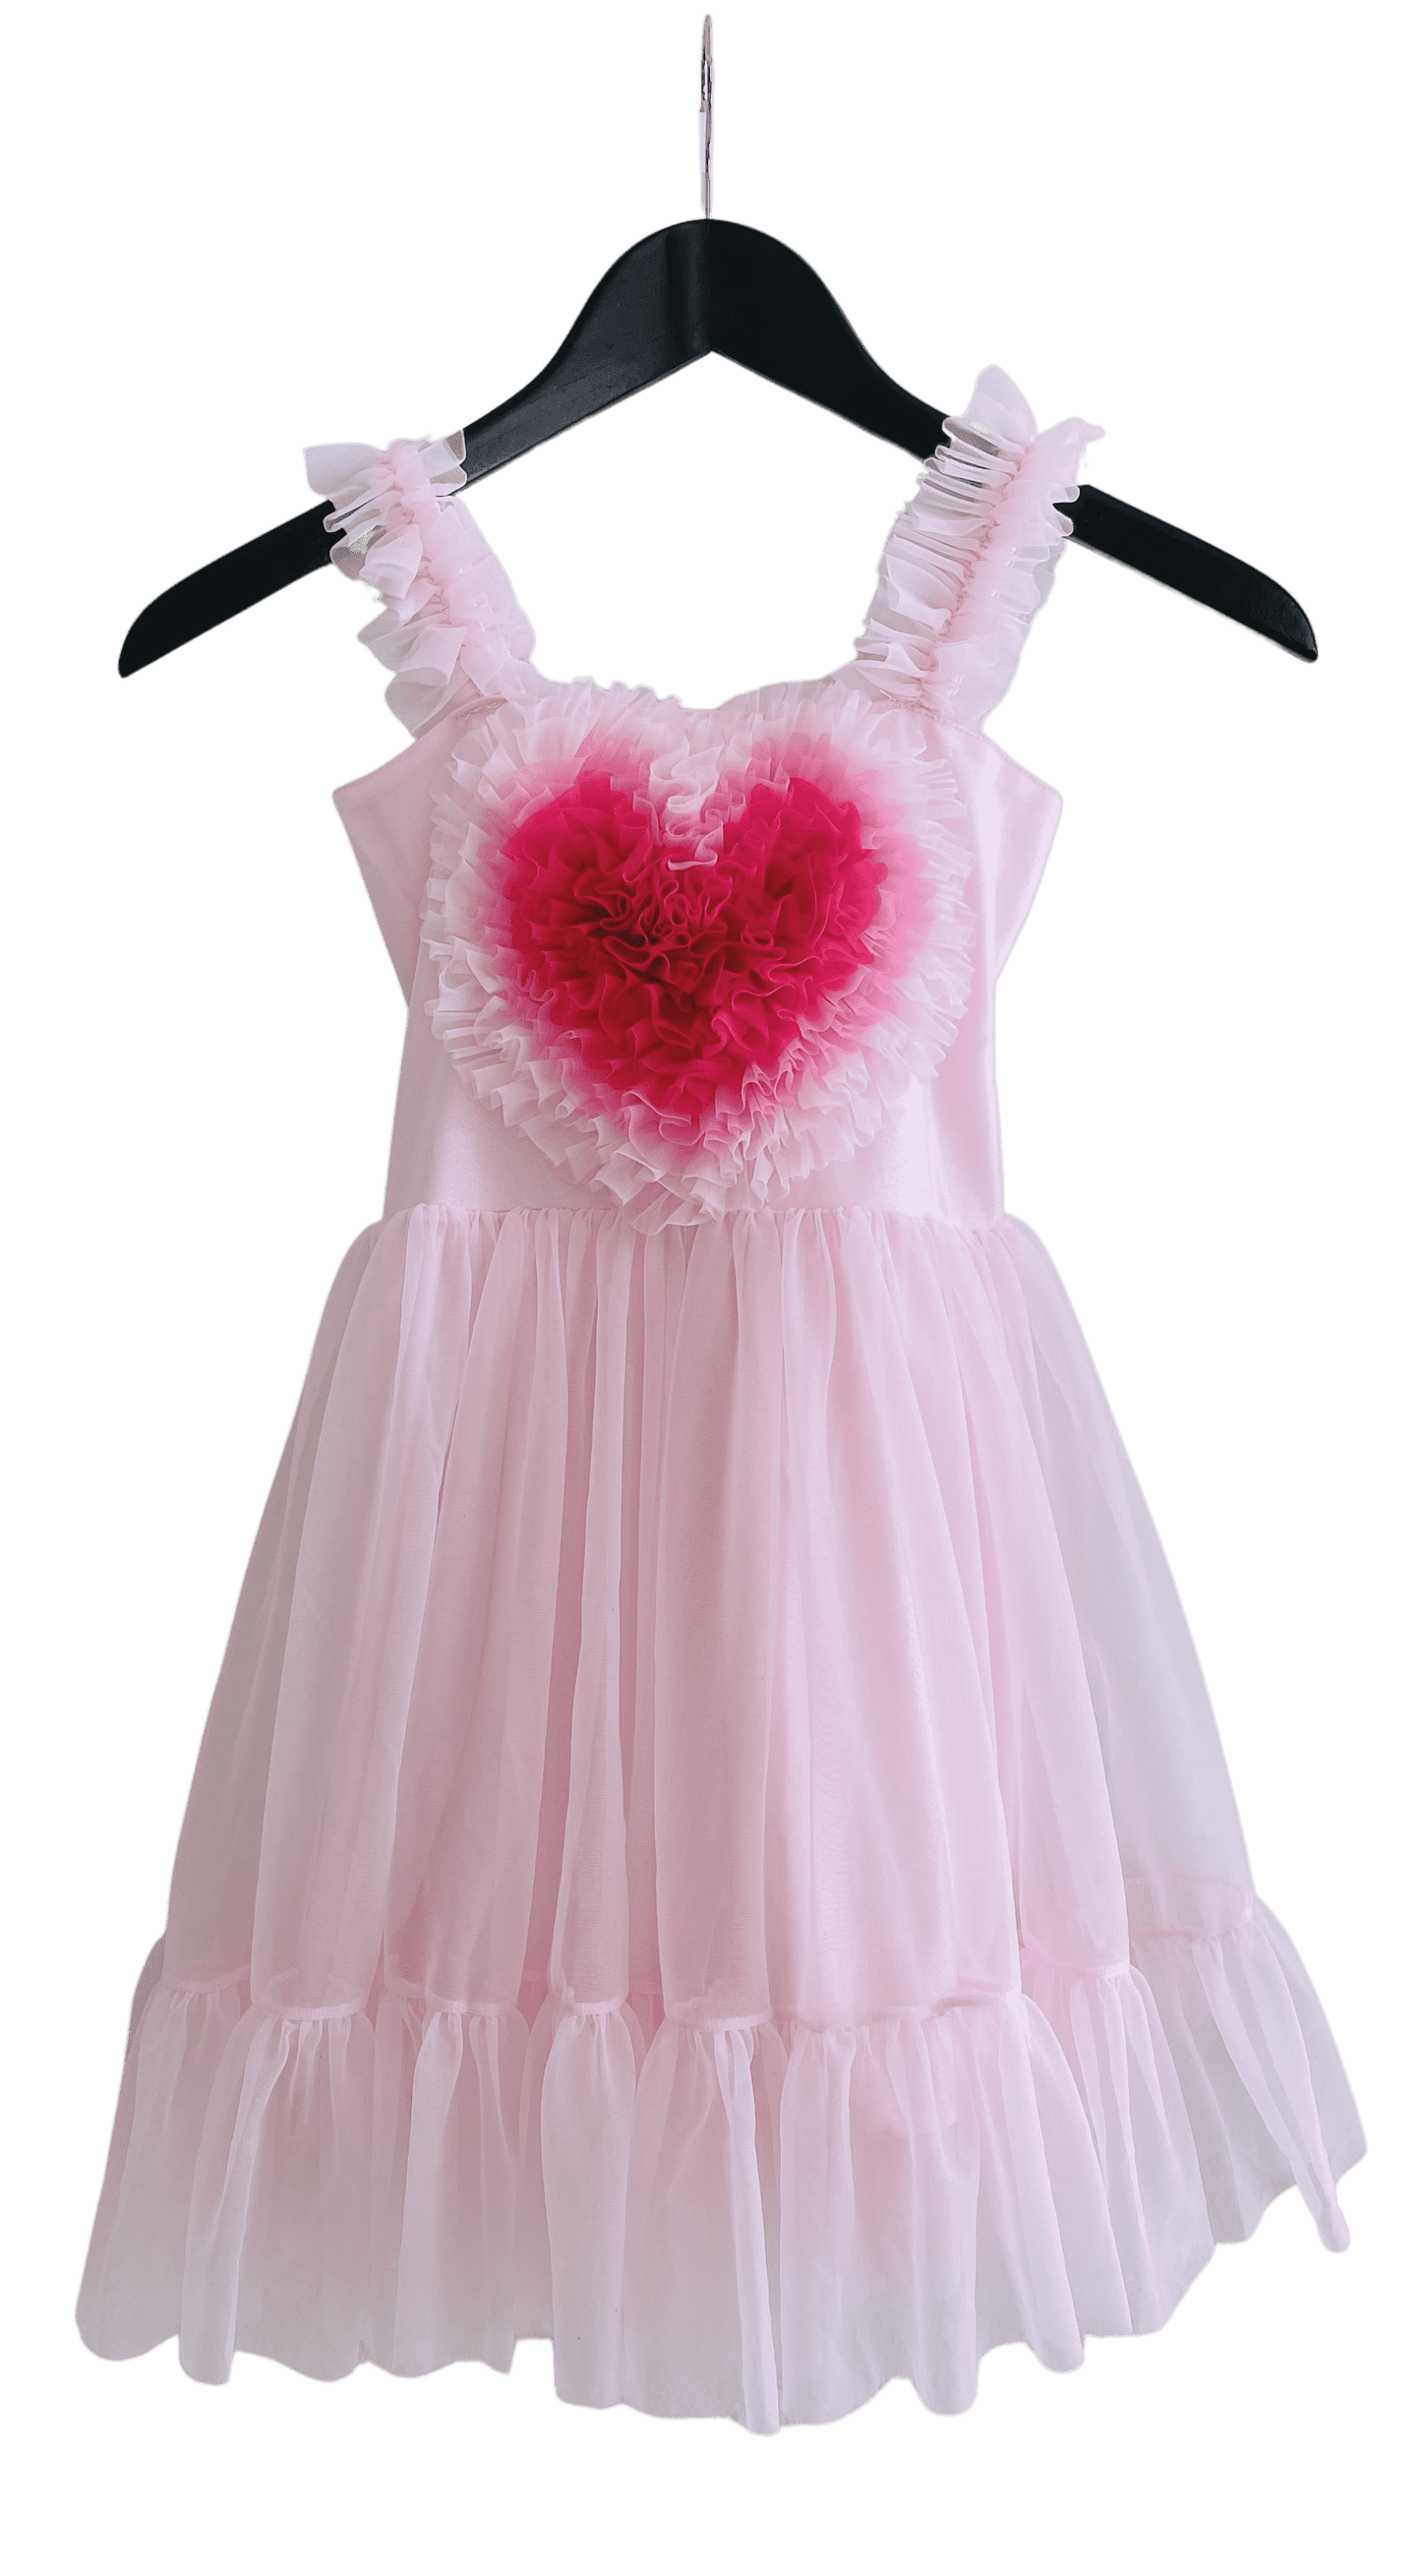 DOLLY ♥ HEART DRESS WITH LACE-UP BACK DRESS strawberry